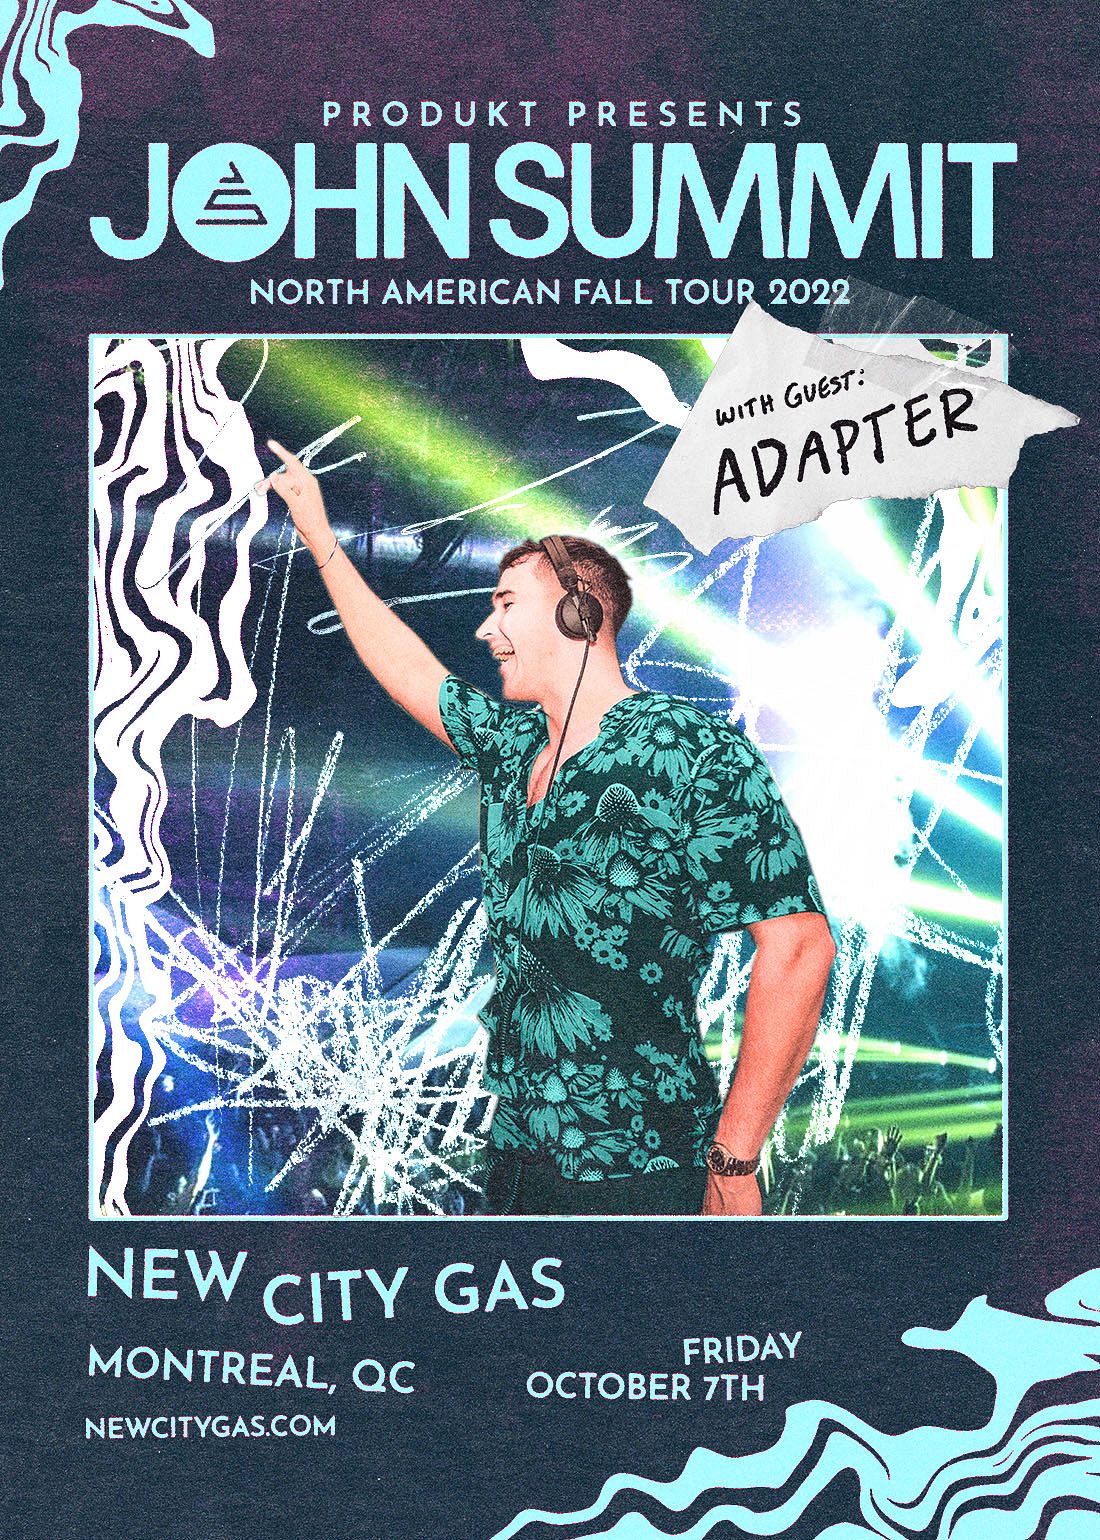 John Summit Tickets at New City Gas in Montreal by New City Gas Tixr